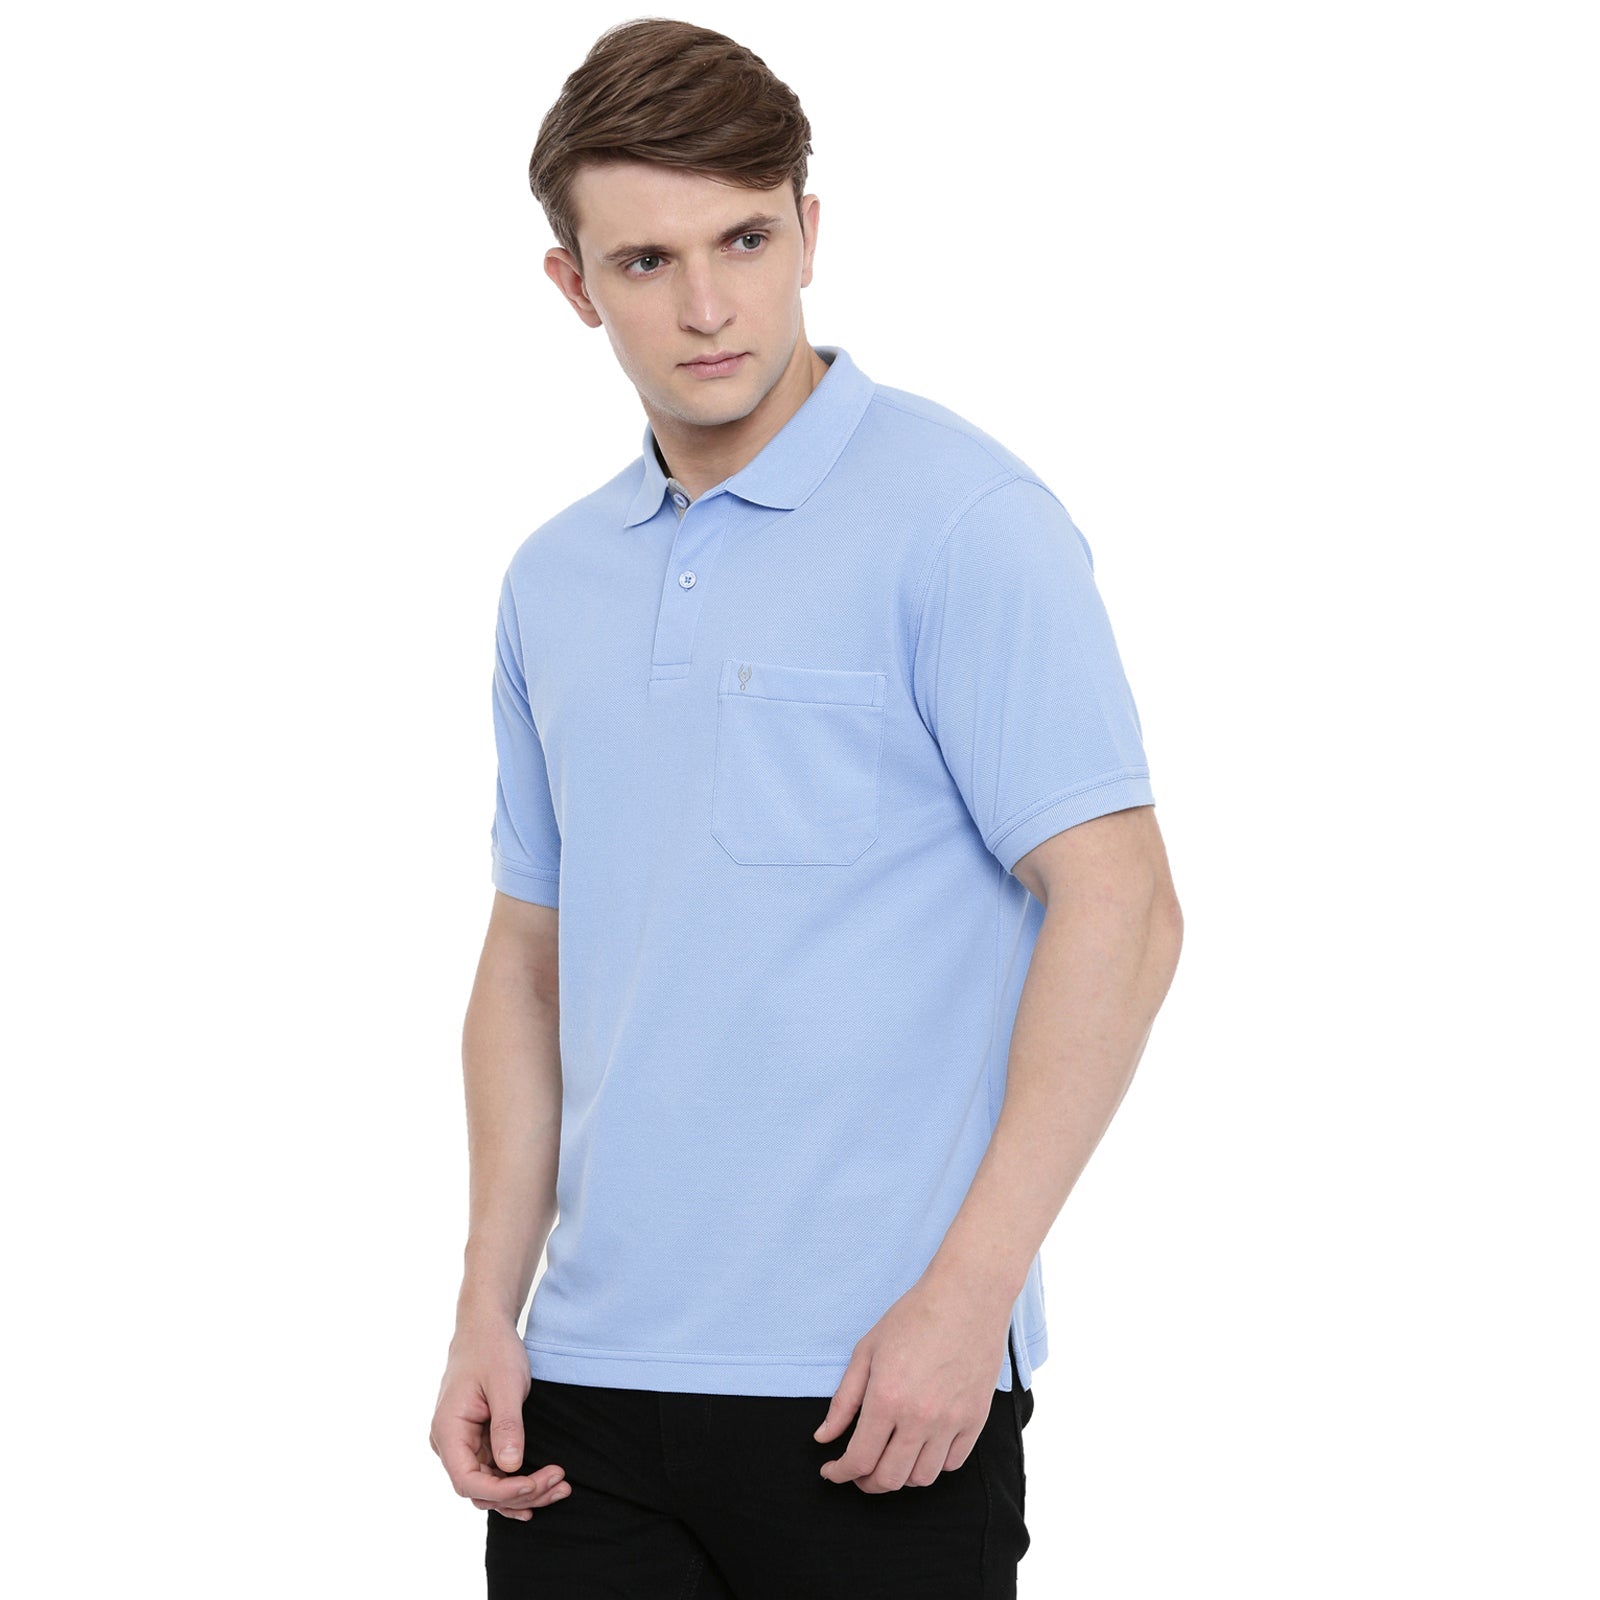 Classic Polo Sky Blue Polo Neck Authentic Fit T Shirt Men - 4SSN 201 T-shirt Classic Polo 